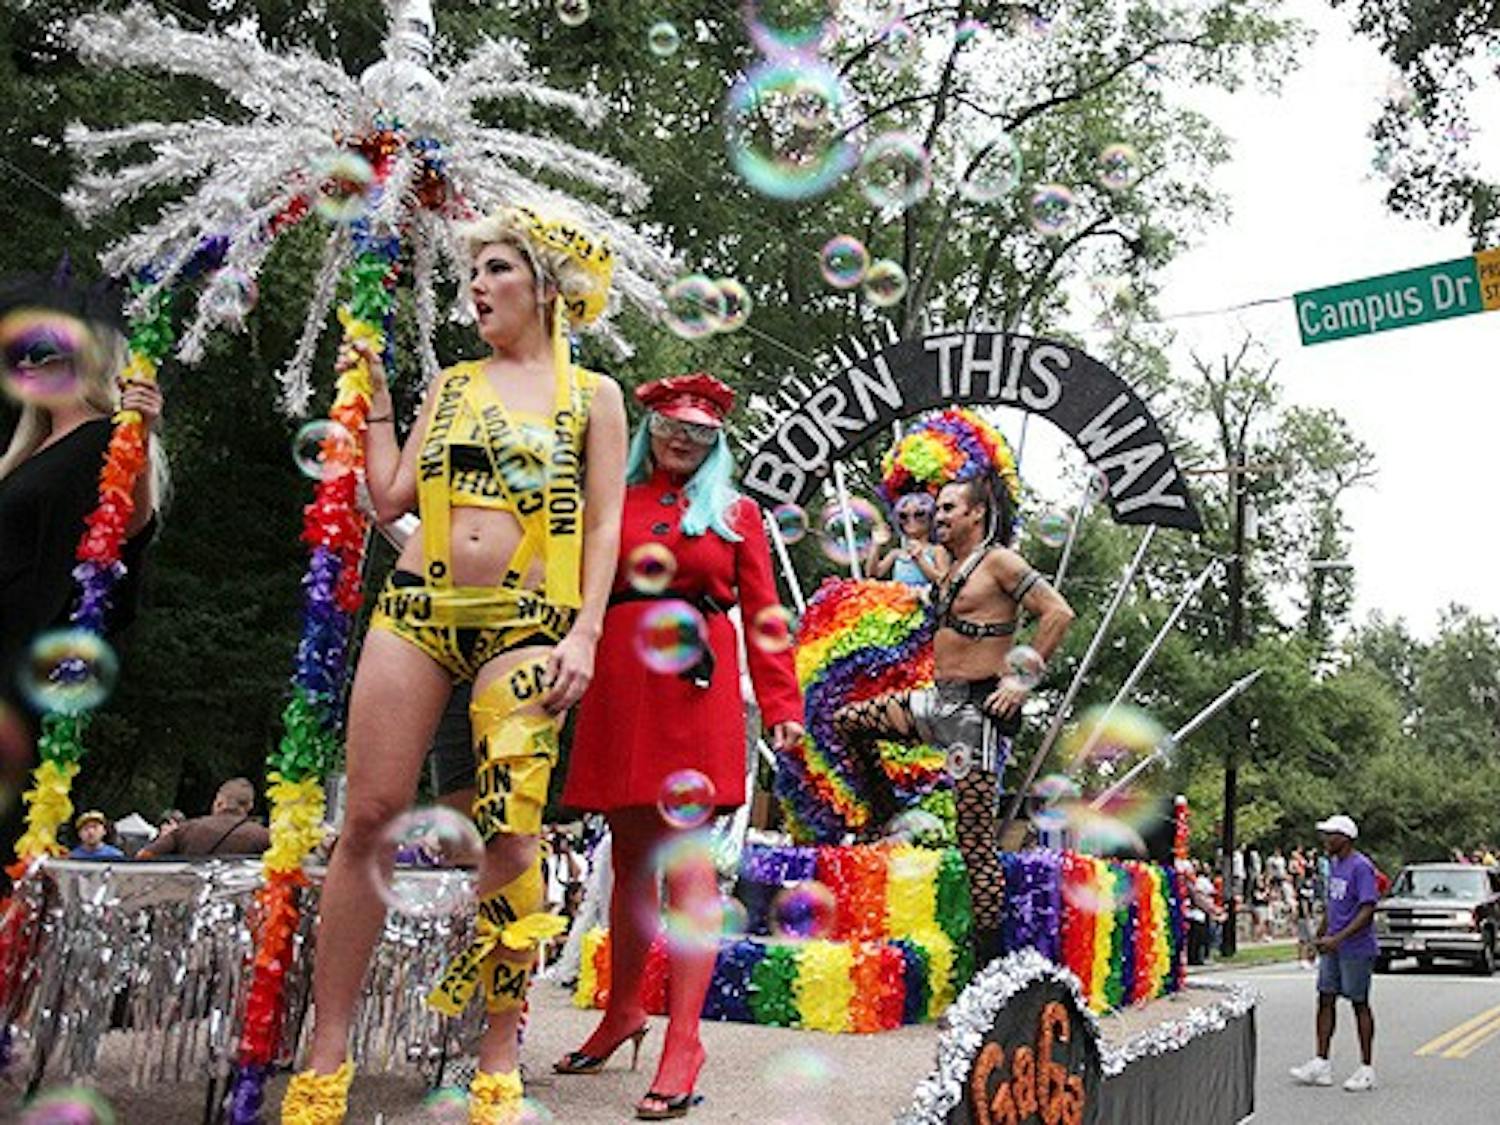 Fourteen floats coasted along a route bordering East Campus during the N.C. Pride Parade Saturday afternoon.